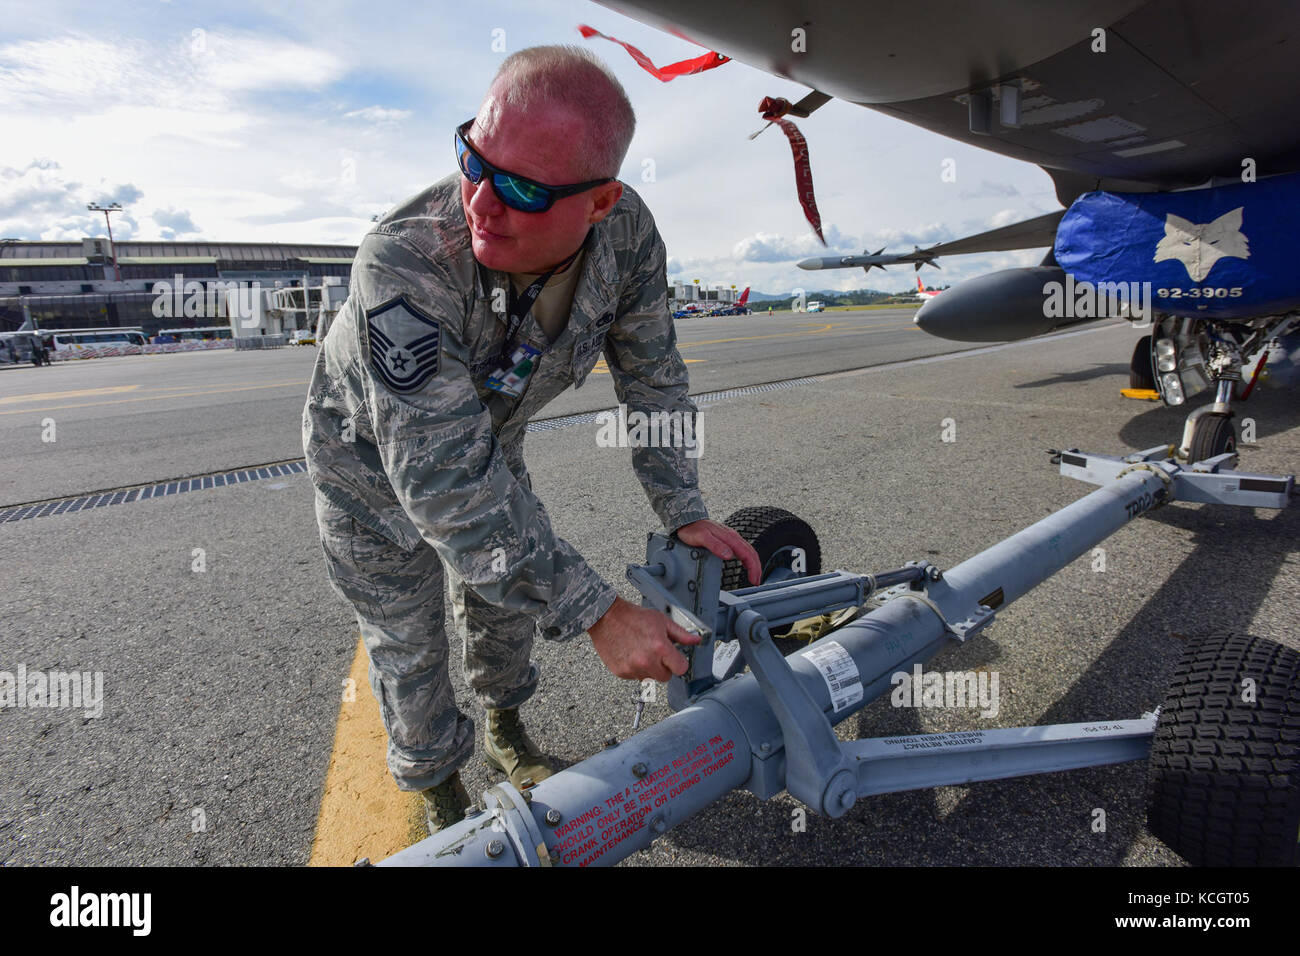 U.S. Air Force Master Sgt. Kenny Pearsall, a crew chief assigned to the 169th Aircraft Maintenance Squadron, operates a tow hook attached to a South Carolina Air National Guard F-16 Fighting Falcon fighter jet at José María Córdova International Airport during F-AIR 2017 in Rionegro, Colombia, July 11, 2017. United States military participation in the air show provides an opportunity to strengthen our military-to-military relationships with regional partners and provides the opportunity to meet with our Colombian air force counterparts and facilitate interoperability, which can be exercised in Stock Photo